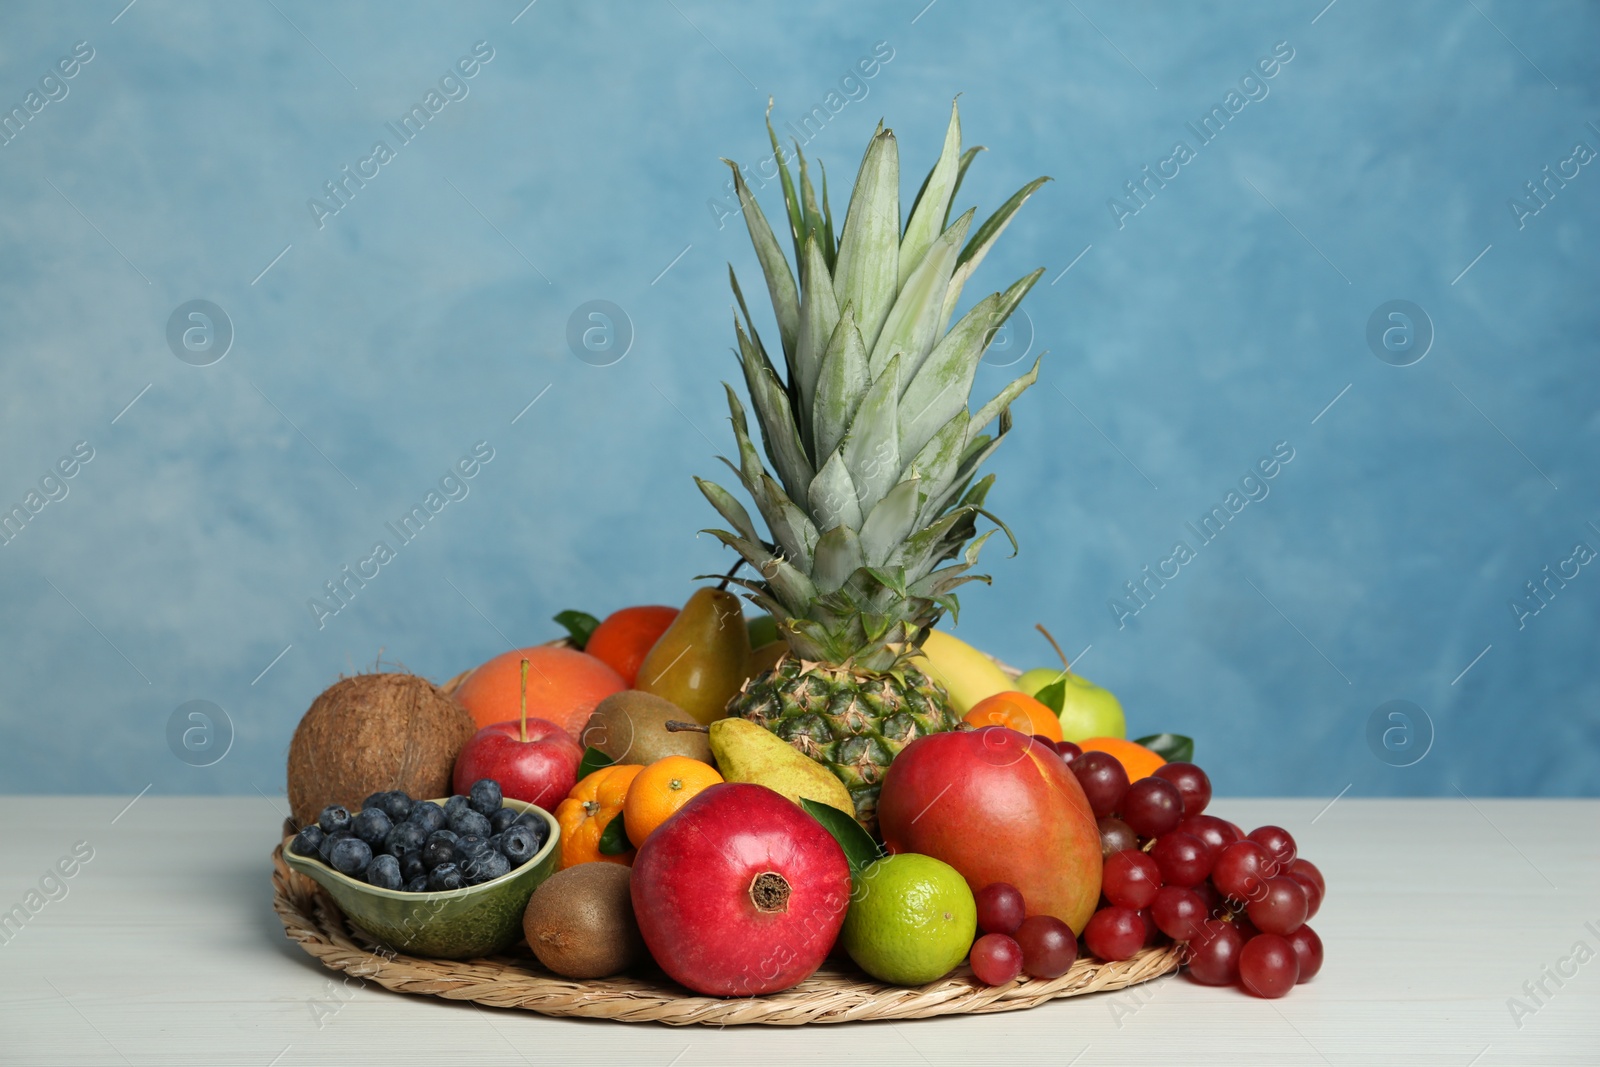 Photo of Assortment of fresh exotic fruits on white wooden table against light blue background